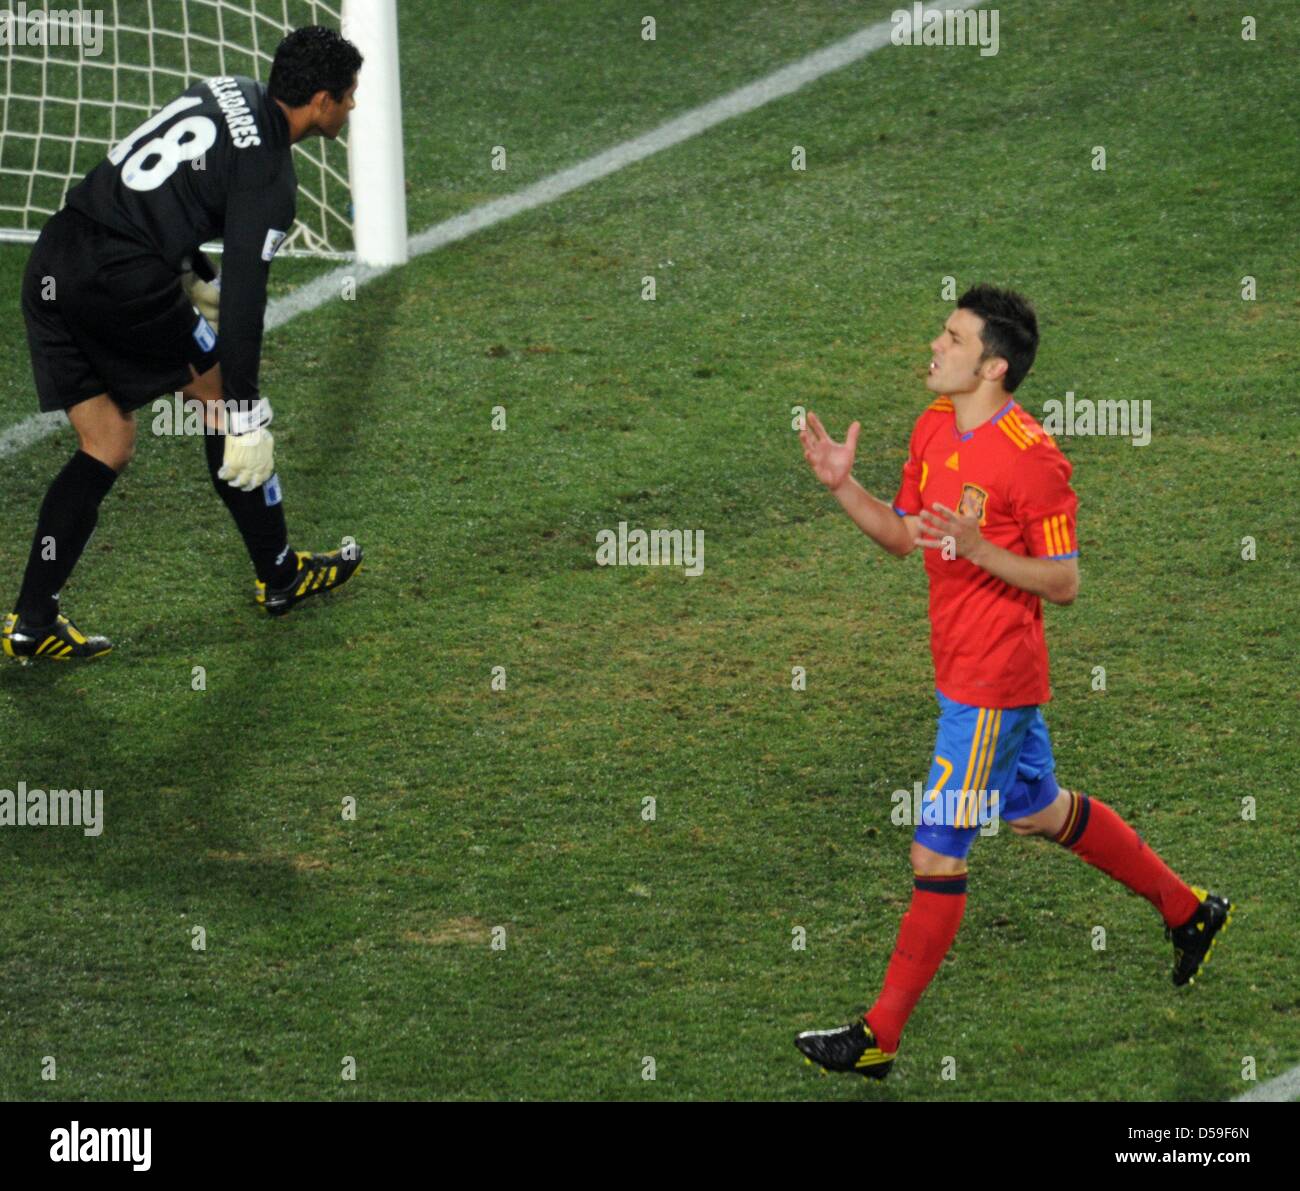 Spain's David Villa reacts after missing to score from penalty spot against Honduras' goalkeeper Noel Valladares during the 2010 FIFA World Cup group H match between Spain and Honduras at Ellis Park Stadium in Johannesburg, South Africa 21 June 2010. Photo: Bernd Weissbrod - Please refer to http://dpaq.de/FIFA-WM2010-TC  +++(c) dpa - Bildfunk+++ Stock Photo